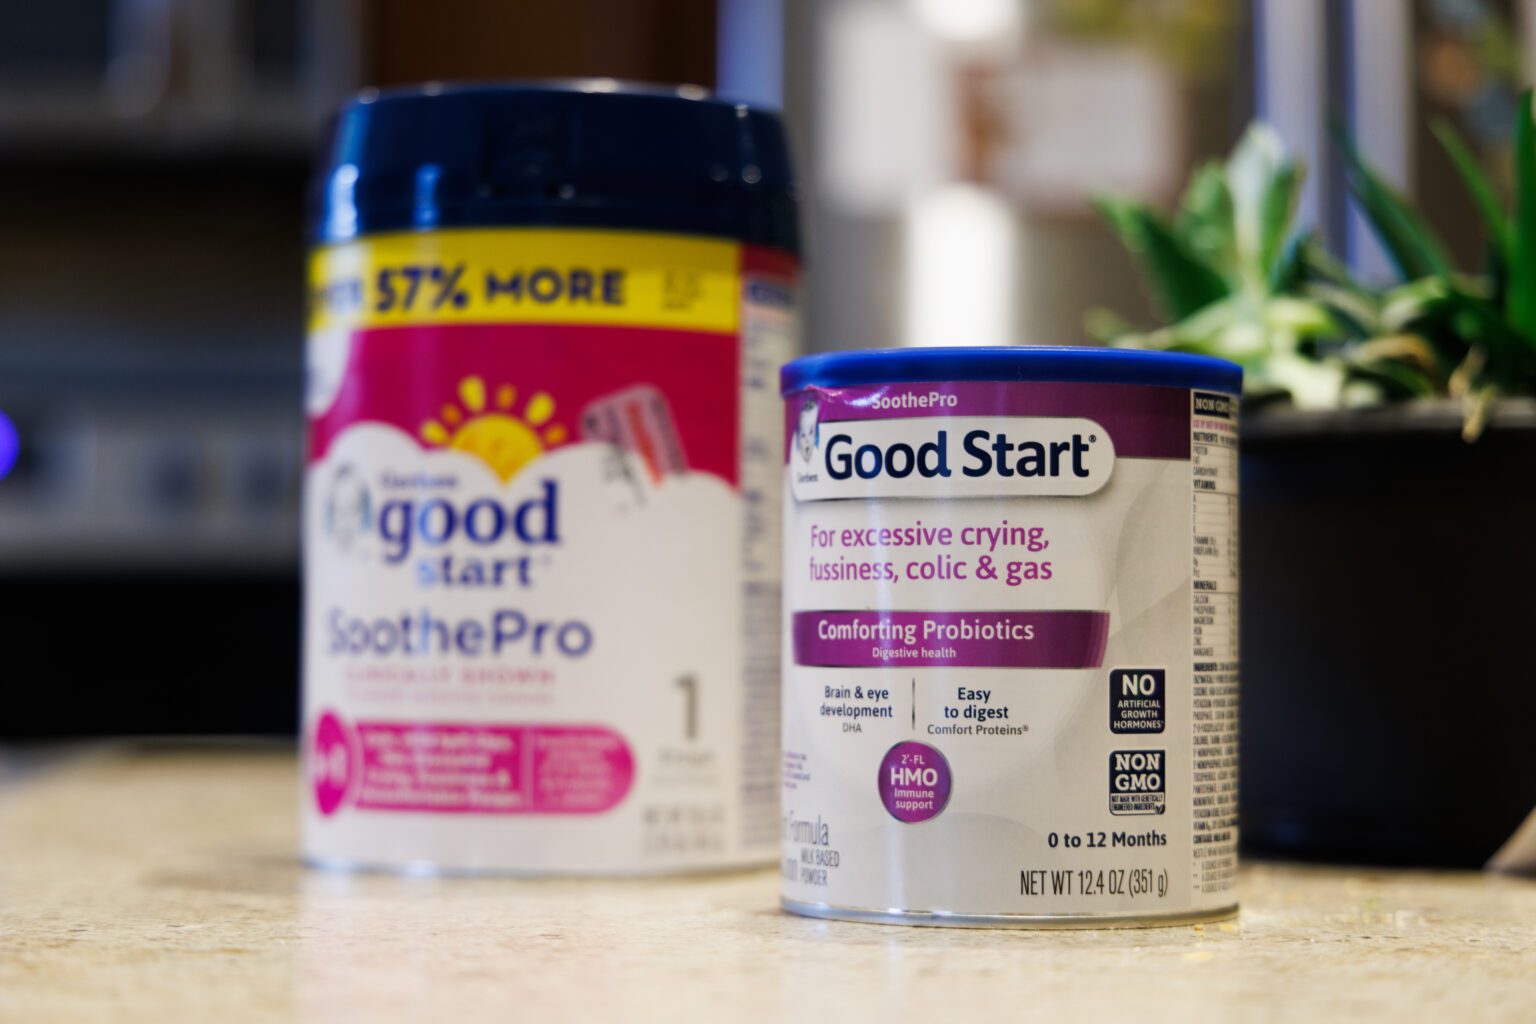 A bill eliminating tariffs on baby formula from trusted suppliers passed the Senate July 21 and is awaiting President Joe Biden's signature.